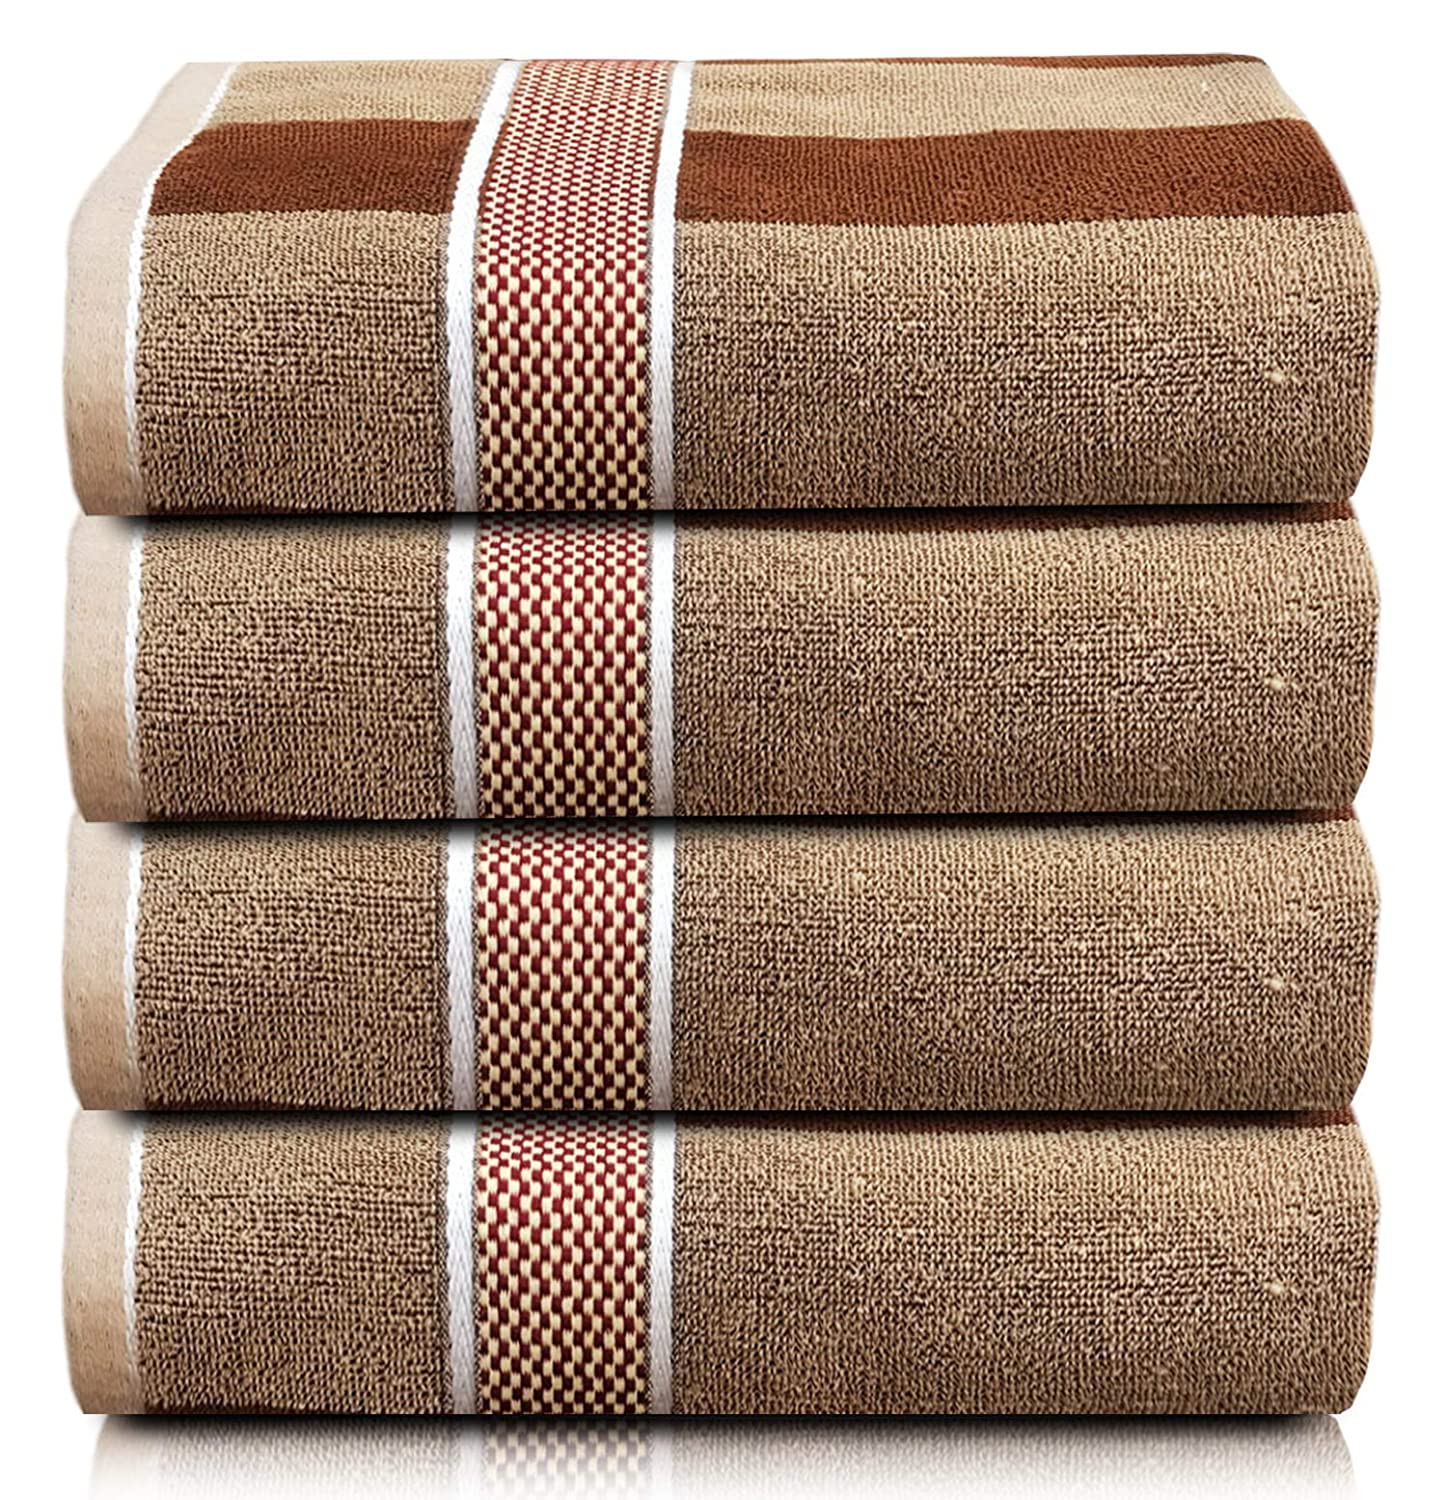 Kuber Industries Lining Design Luxurious, Soft Cotton Bath Towel With Check Border, 30